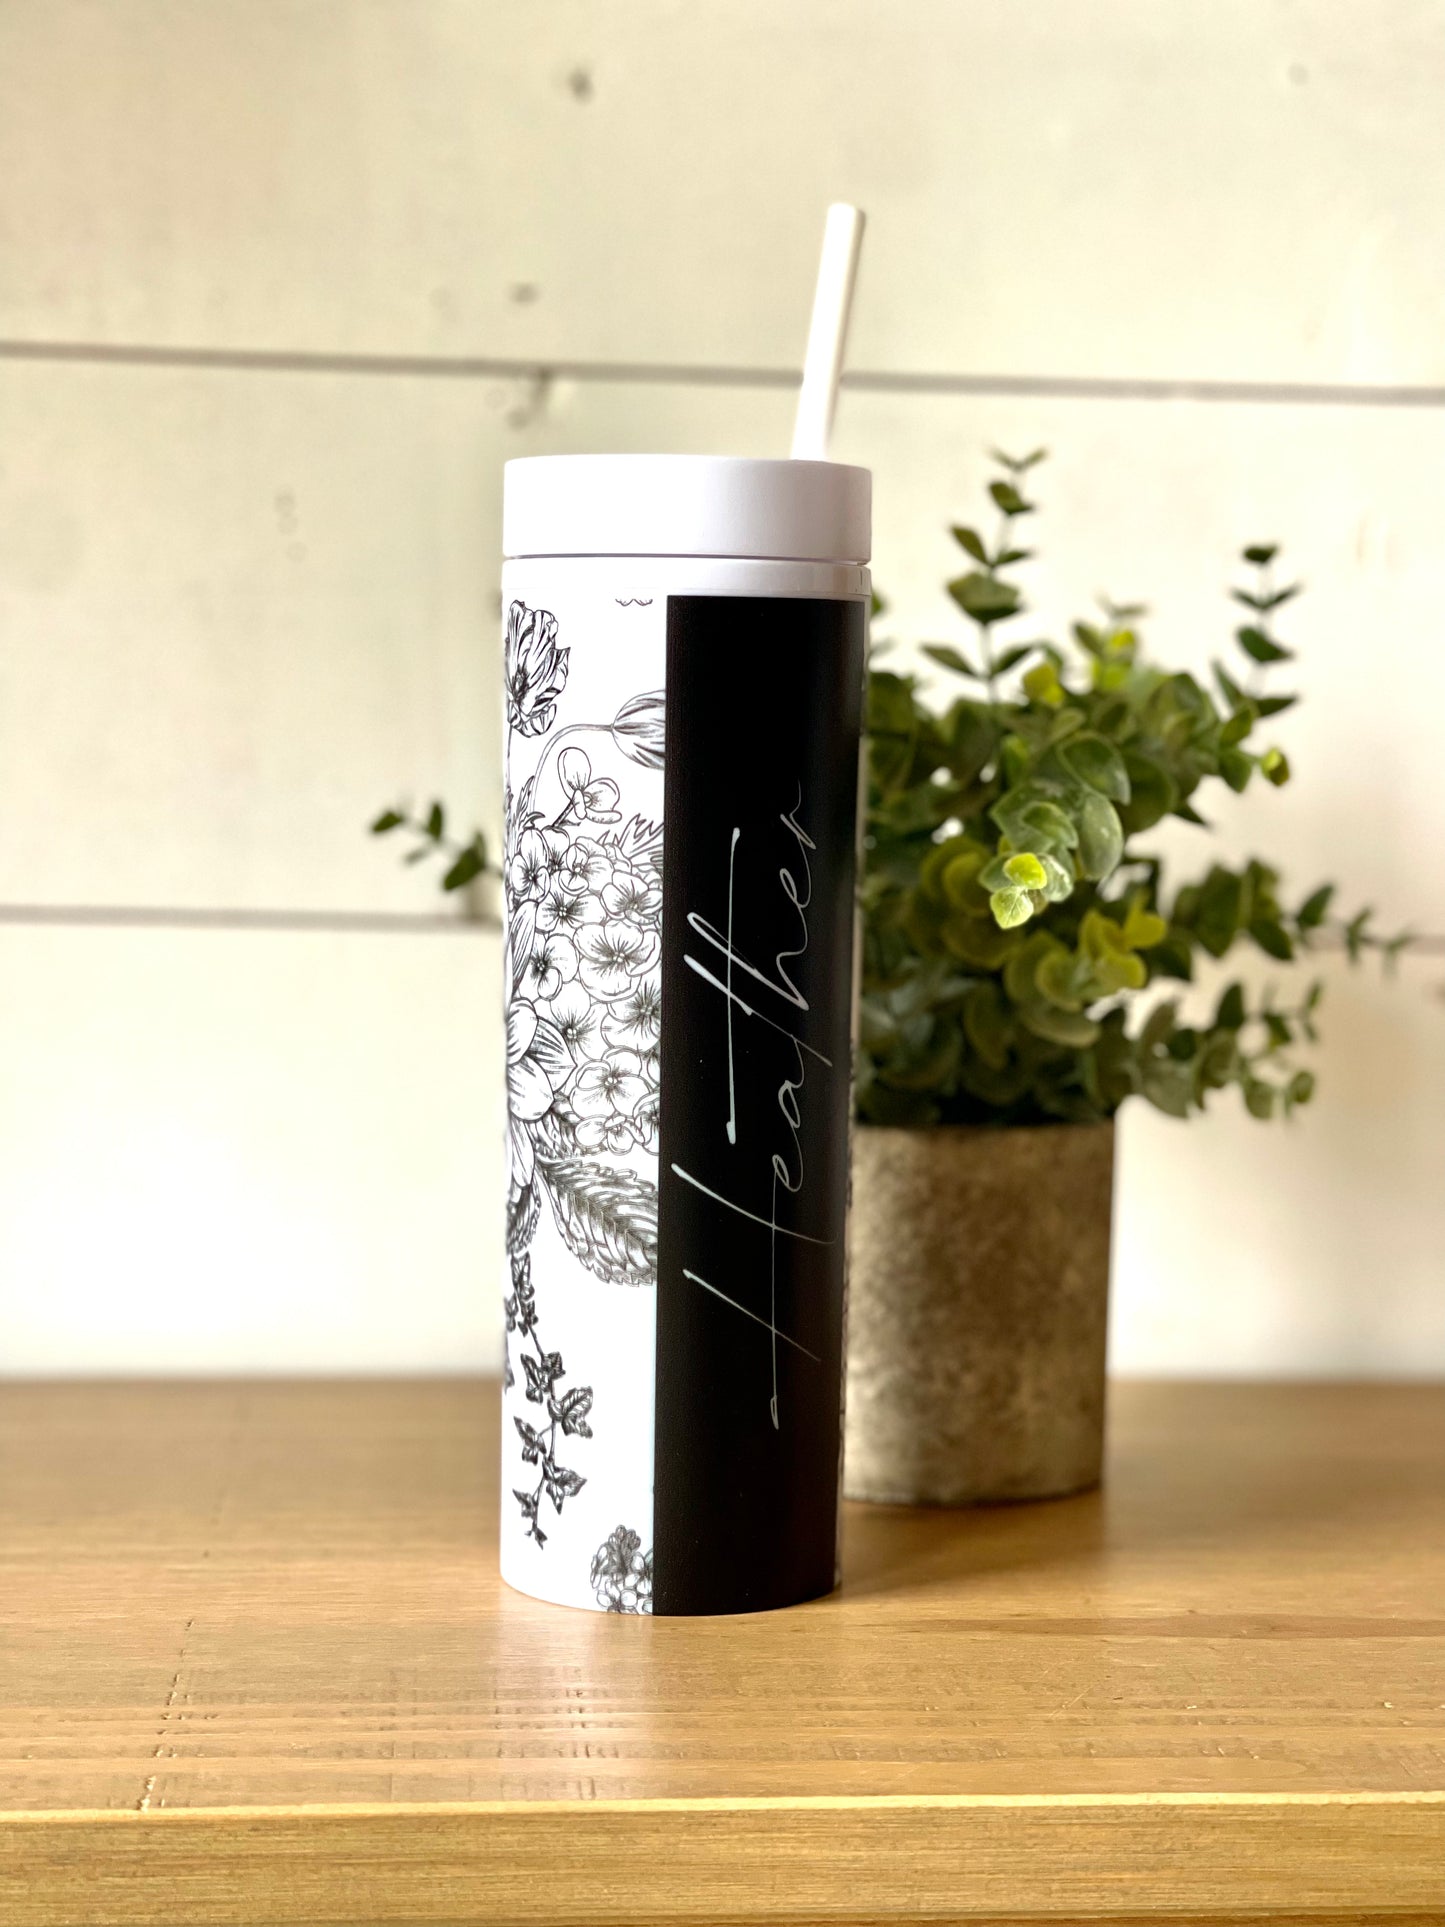 Botanical Flower Personalized Skinny Tumbler with Lid and Straw, 16 oz Matte Black Acrylic Tumbler Insulated Double Wall Plastic Reusable Cups